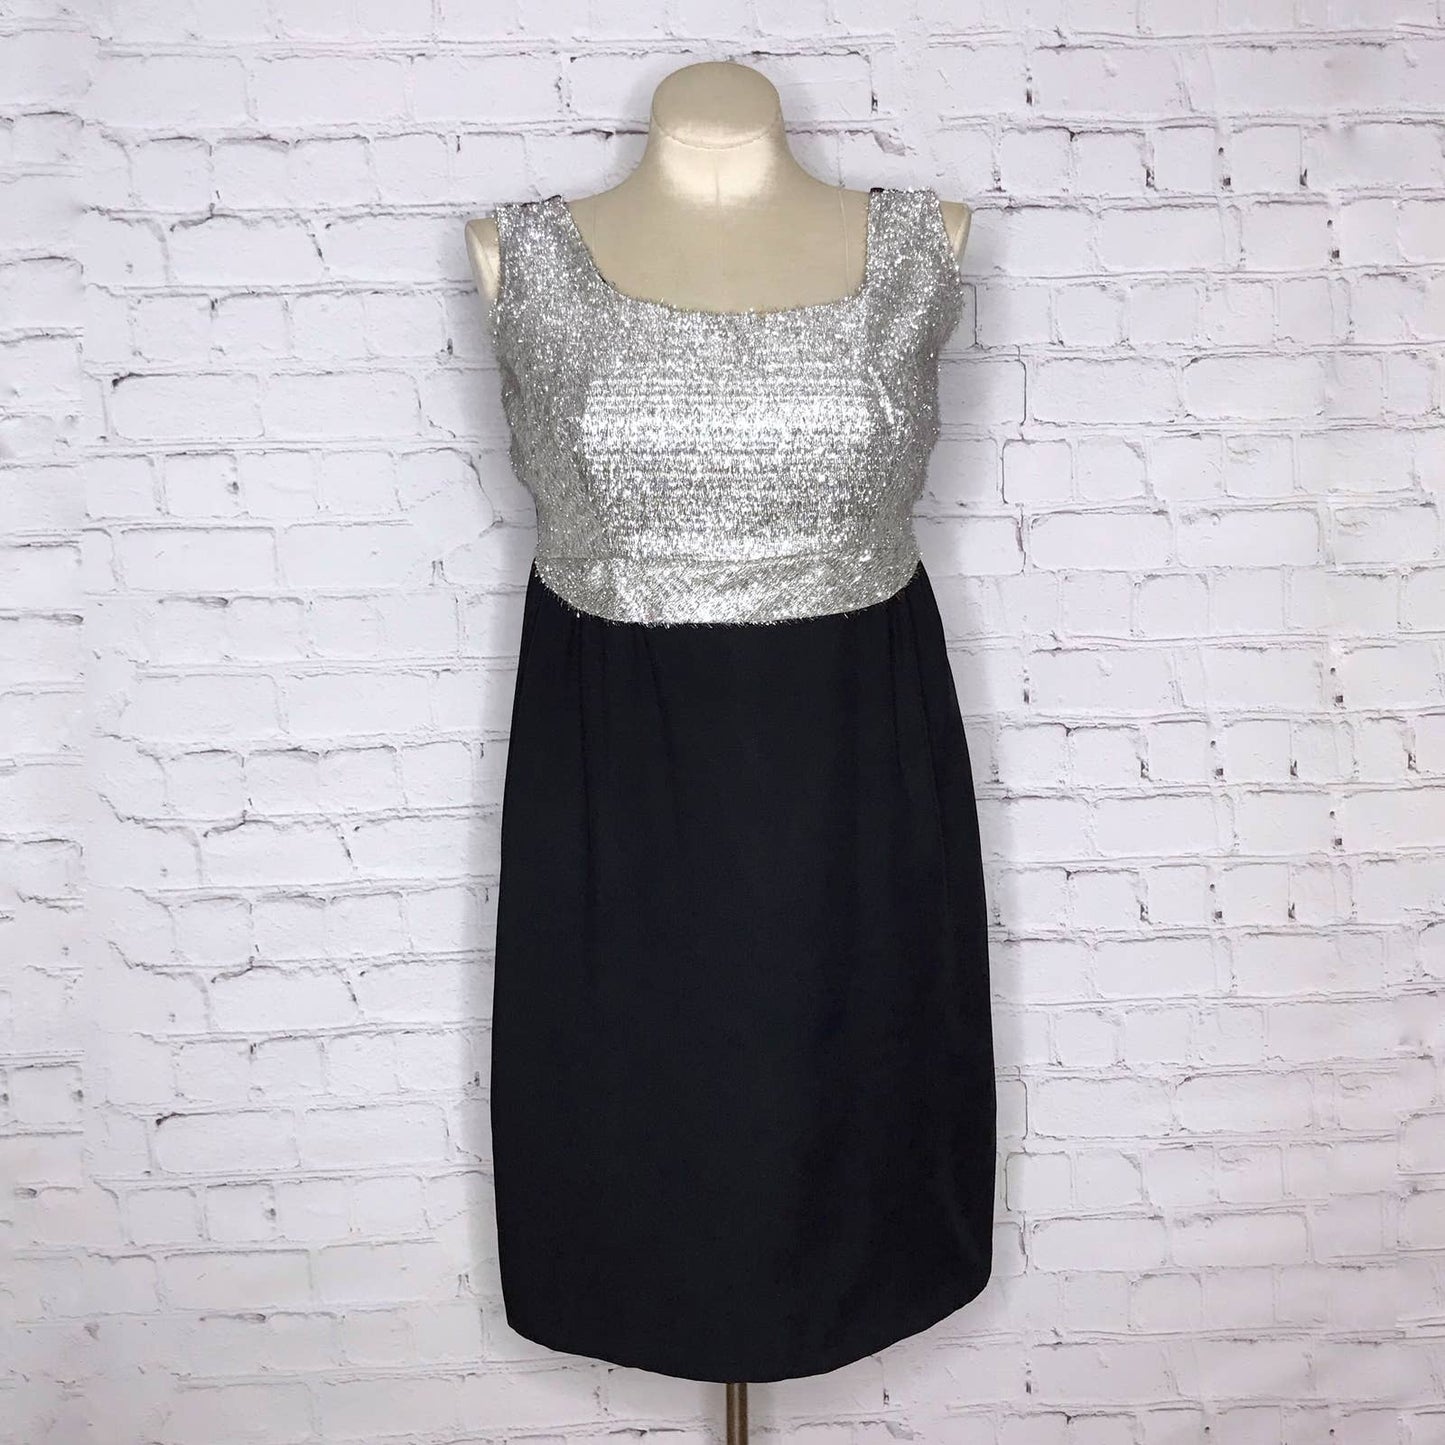 60s Vintage Eyelash Tinsel Party Dress Black and Silver Handmade Size S M